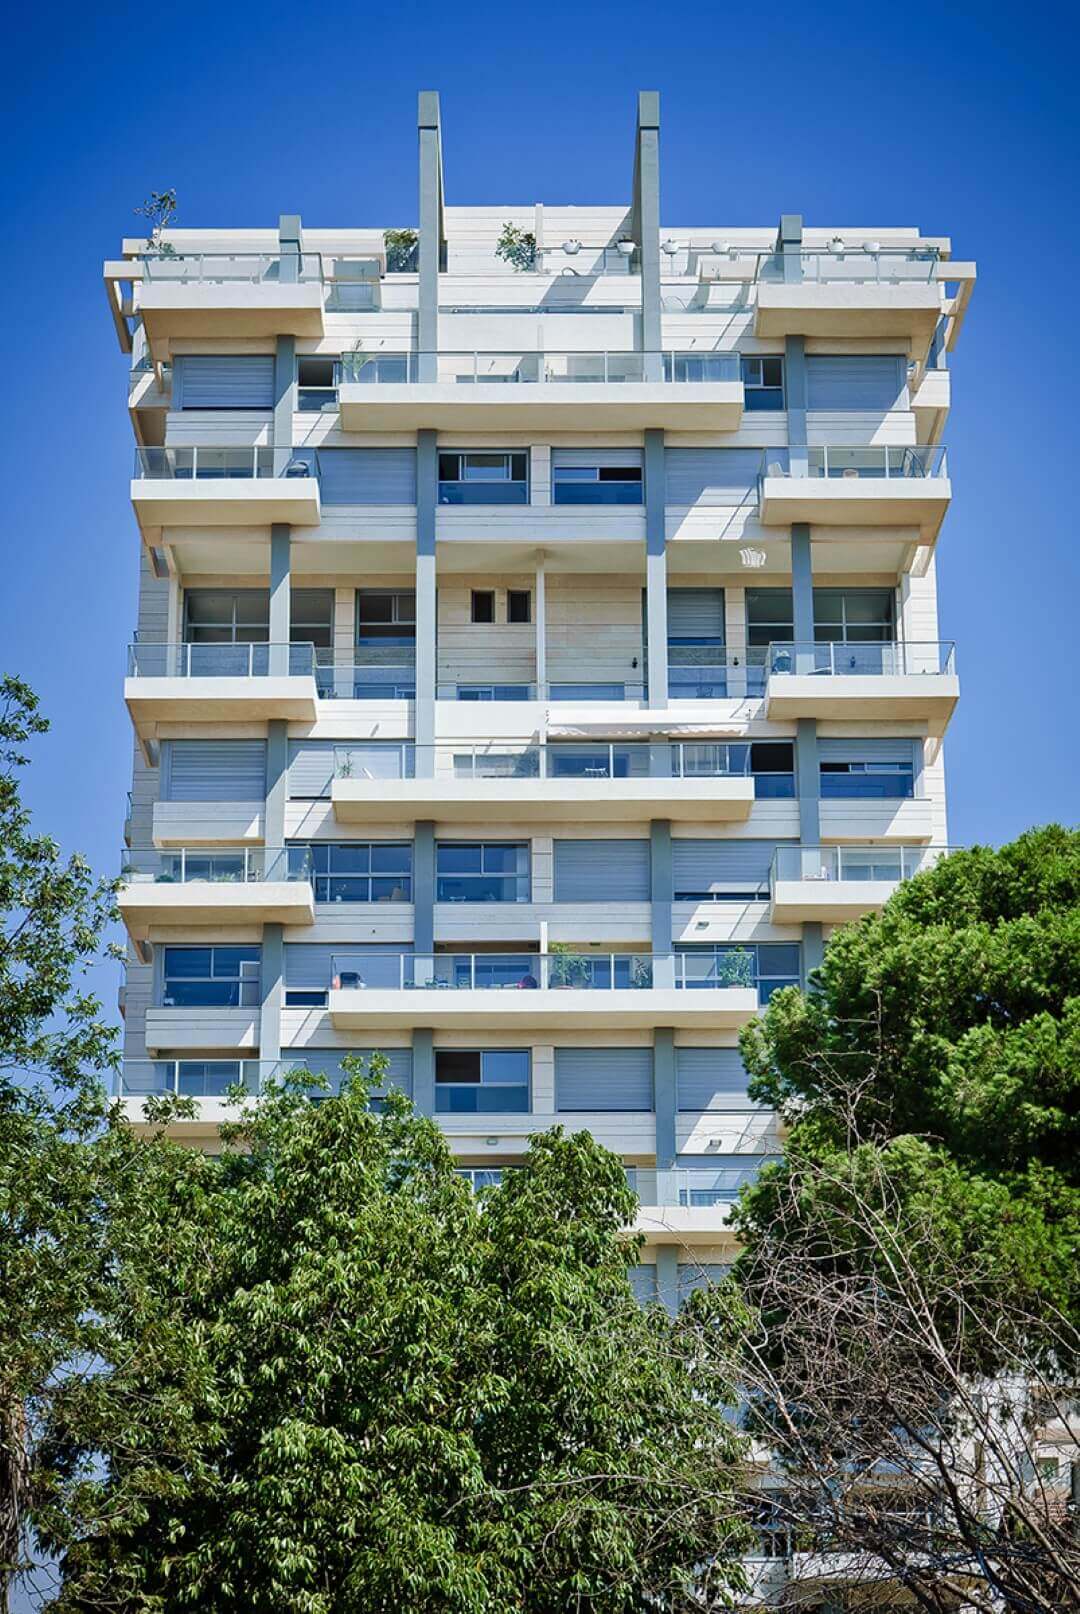 Photograph of a building from the Aviv project in Hamigdal - the tower in Herzliya